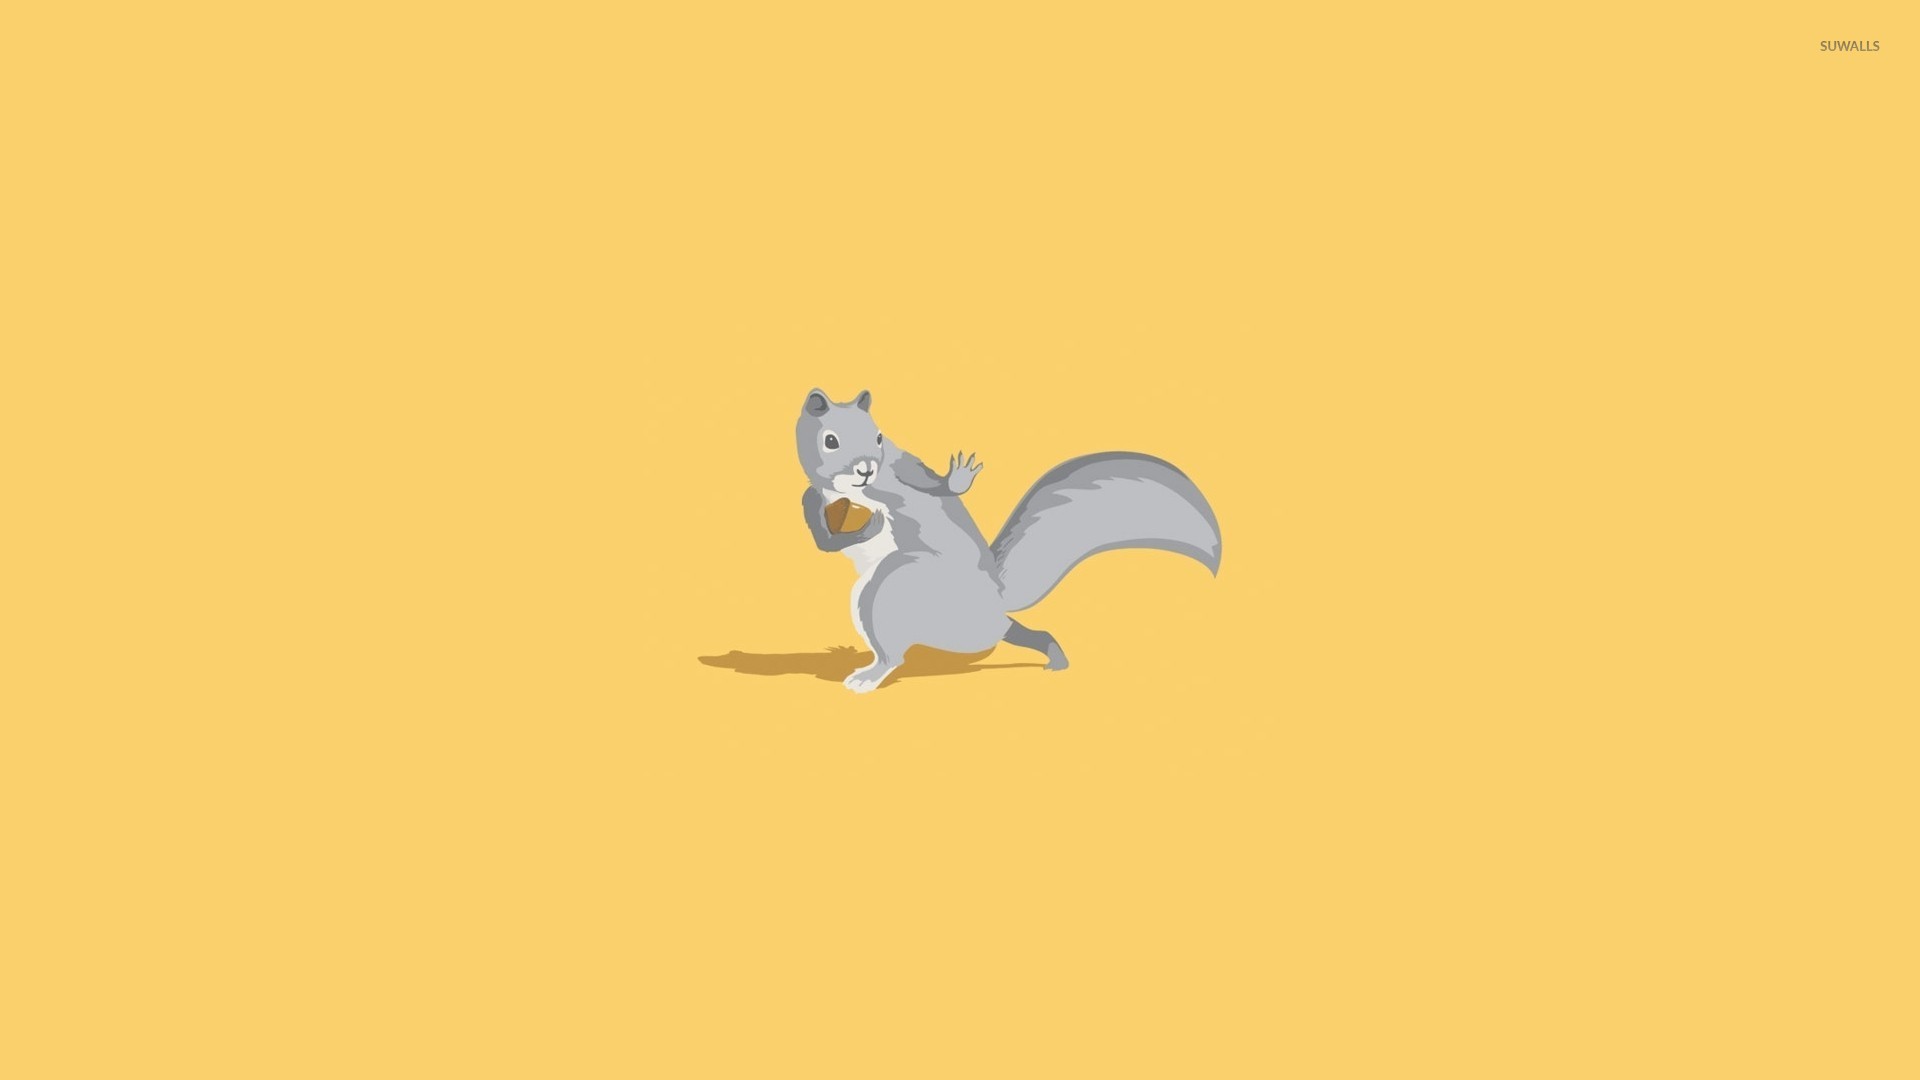 Squirrel with a nut wallpaper - Funny wallpapers - #21928